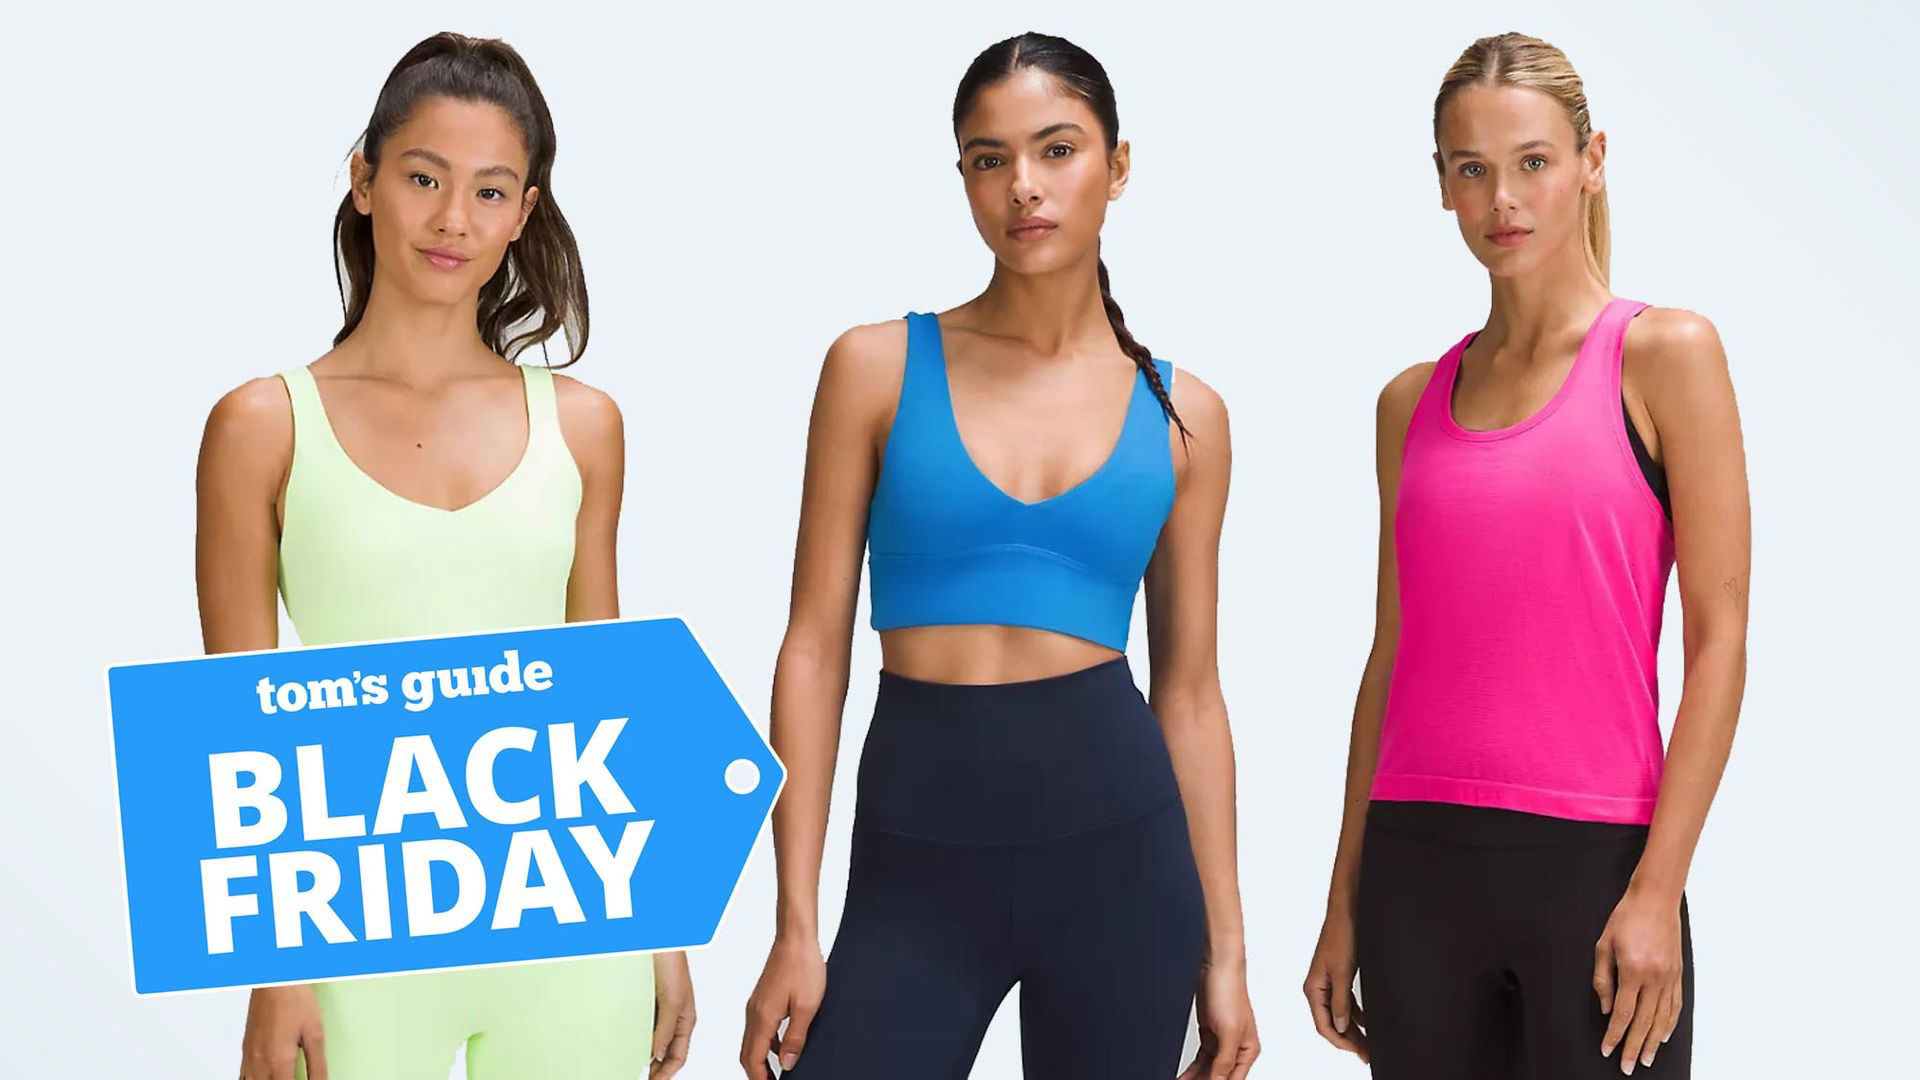 Lululemon Black Friday deals — 5 best early sales you can shop right now